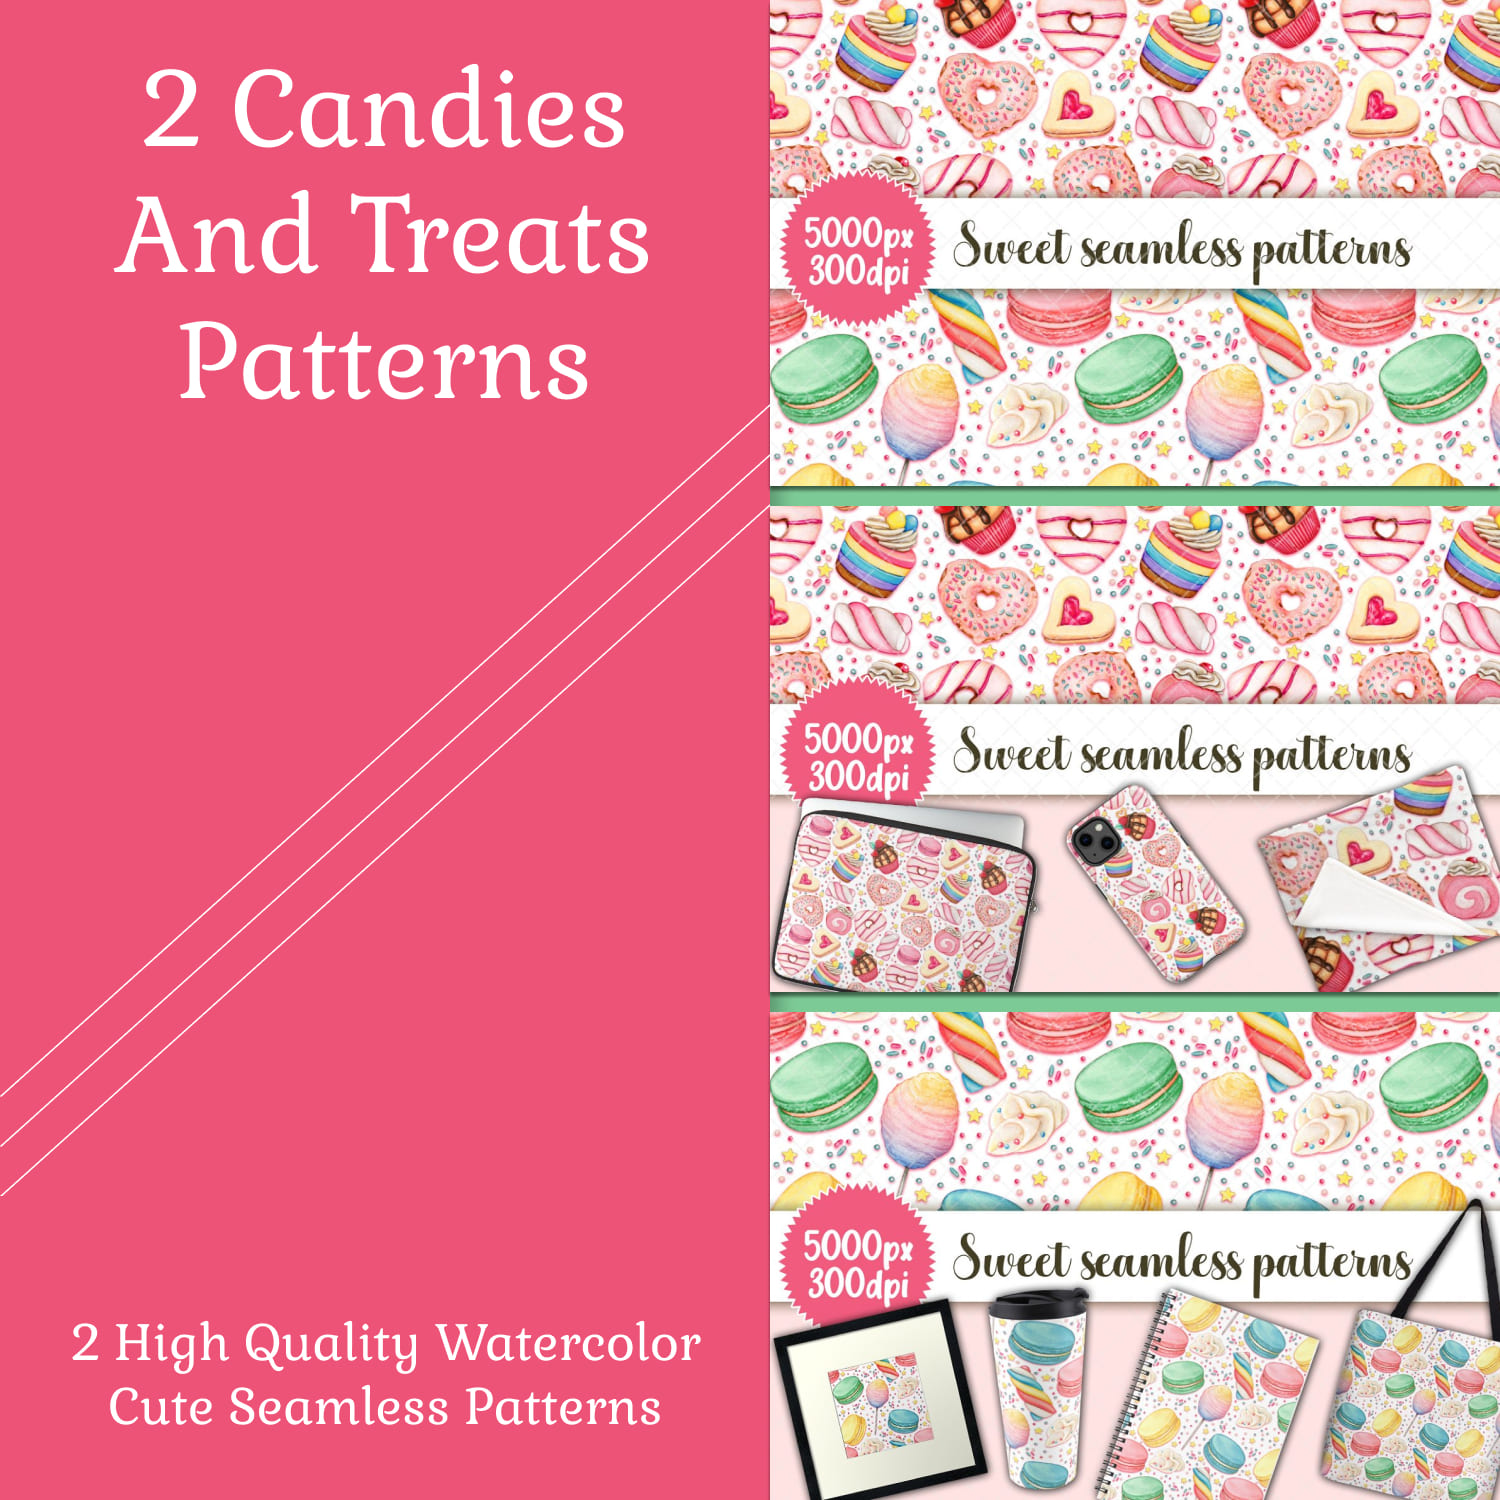 2 candies and treats patterns.